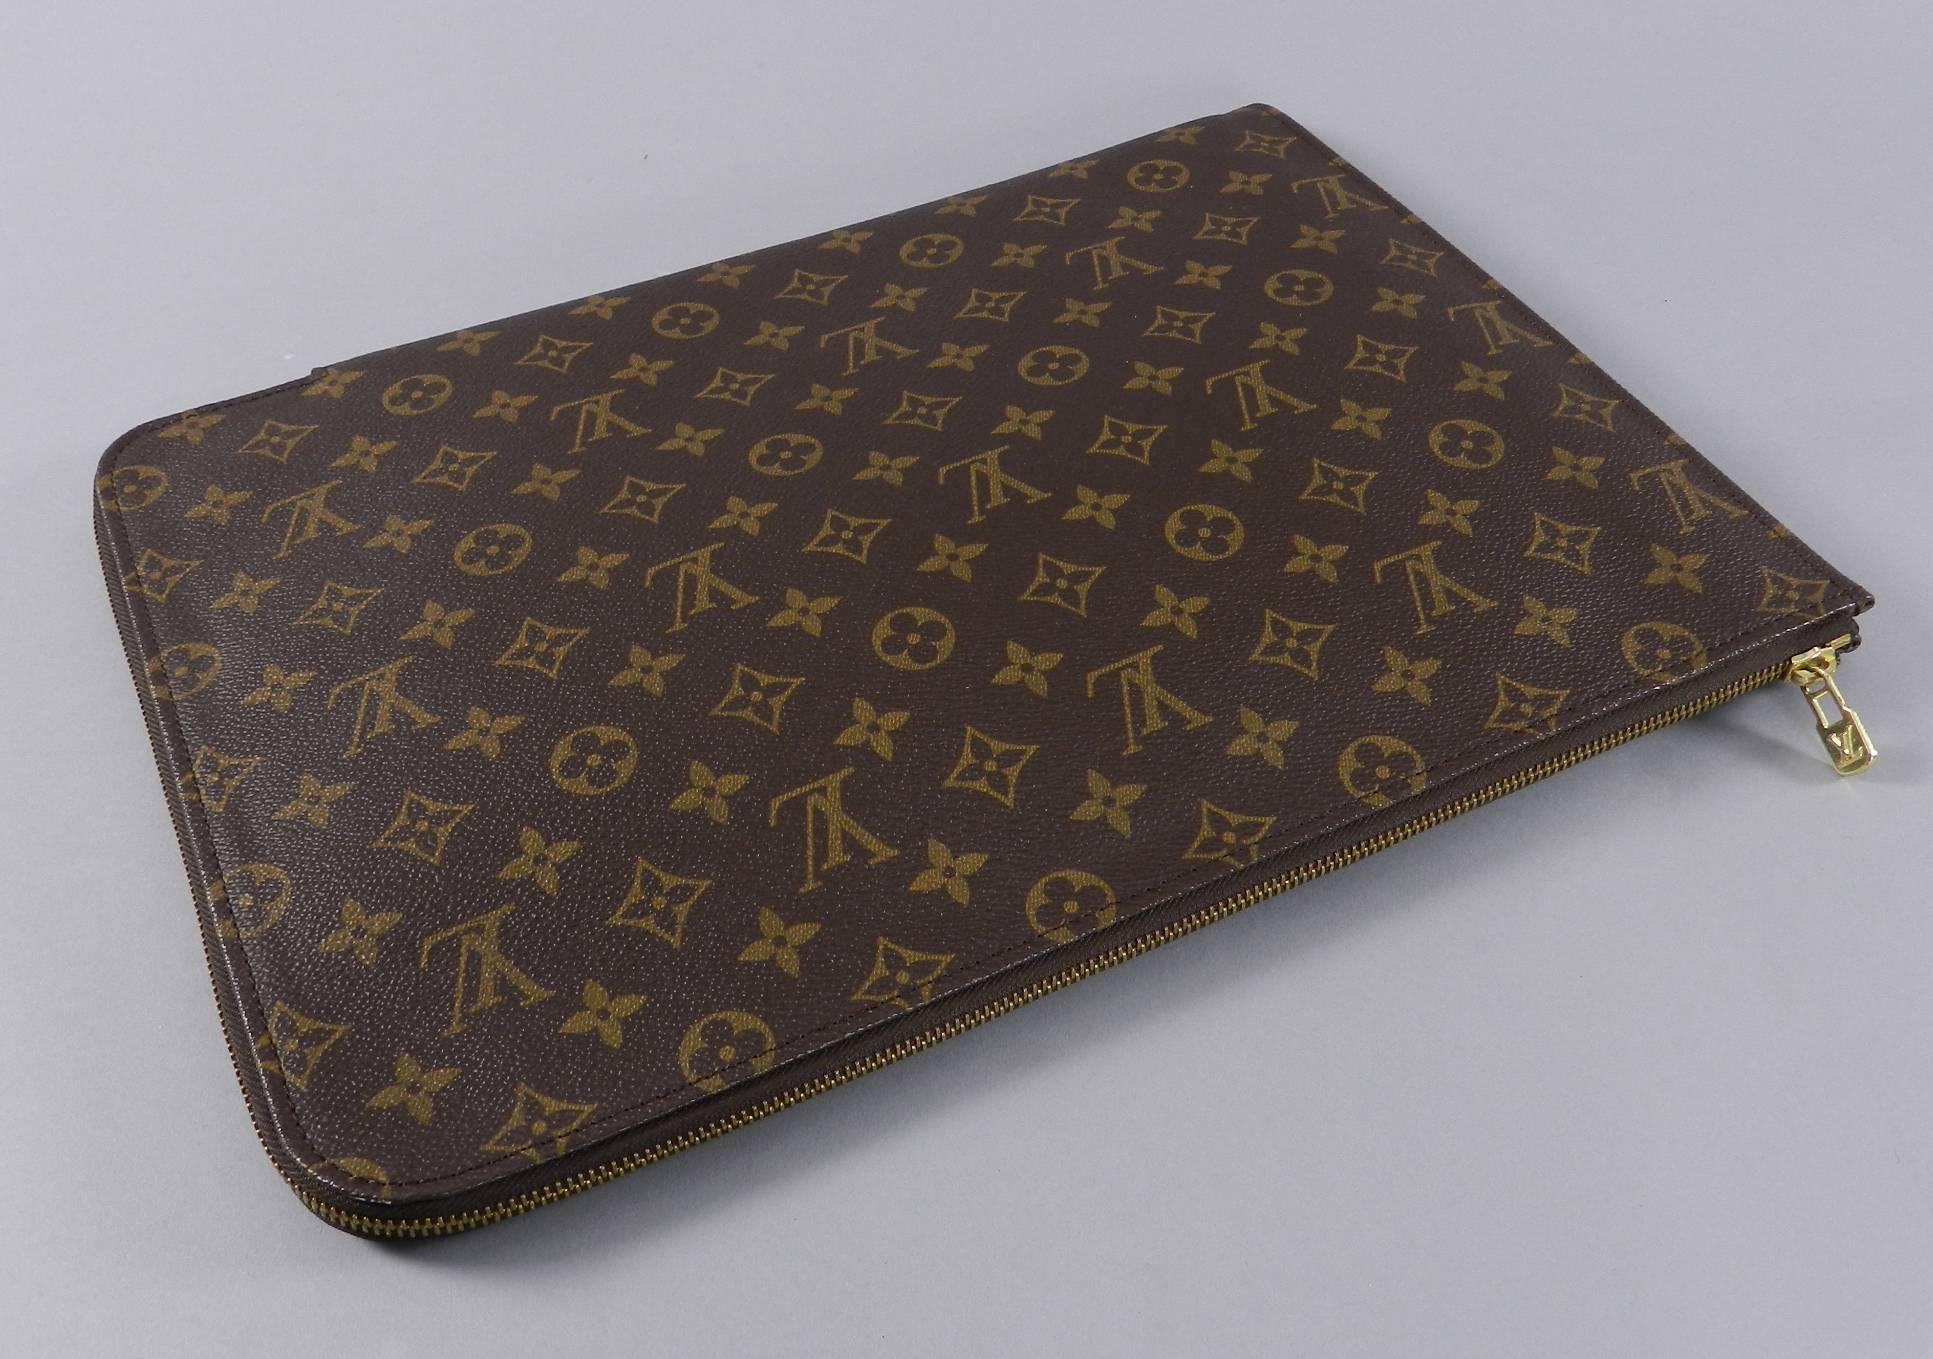 Louis Vuitton monogram poche documents portfolio. Measures 15.5 x 11.25 x 1” Excellent pre-owned condition. Date stamp TH 0952.

We ship worldwide.
